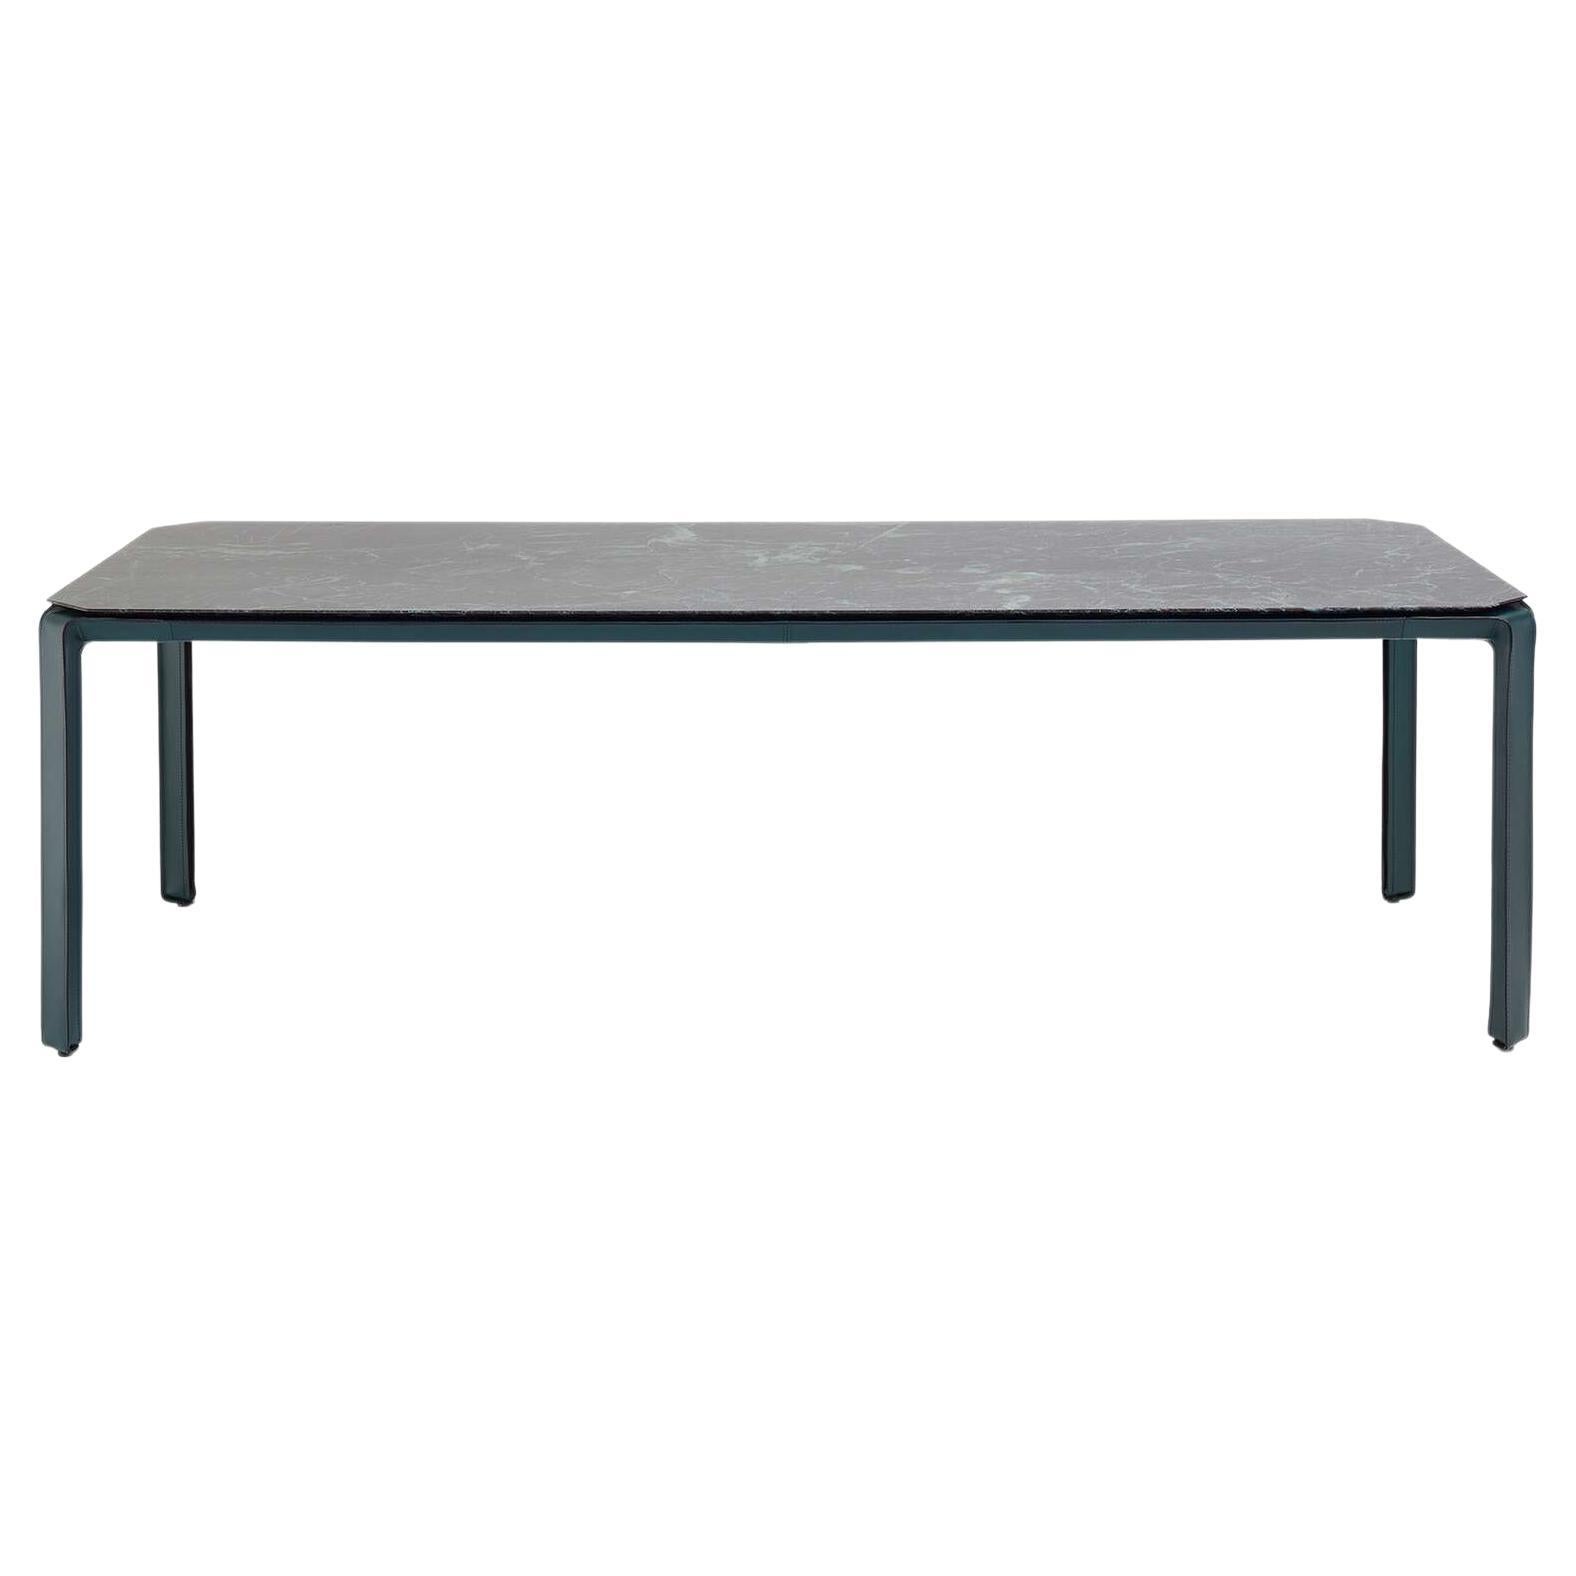 Mario Bellini 'Cab Tab' Table in Leather Marble, Wood for Cassina, Italy - new For Sale